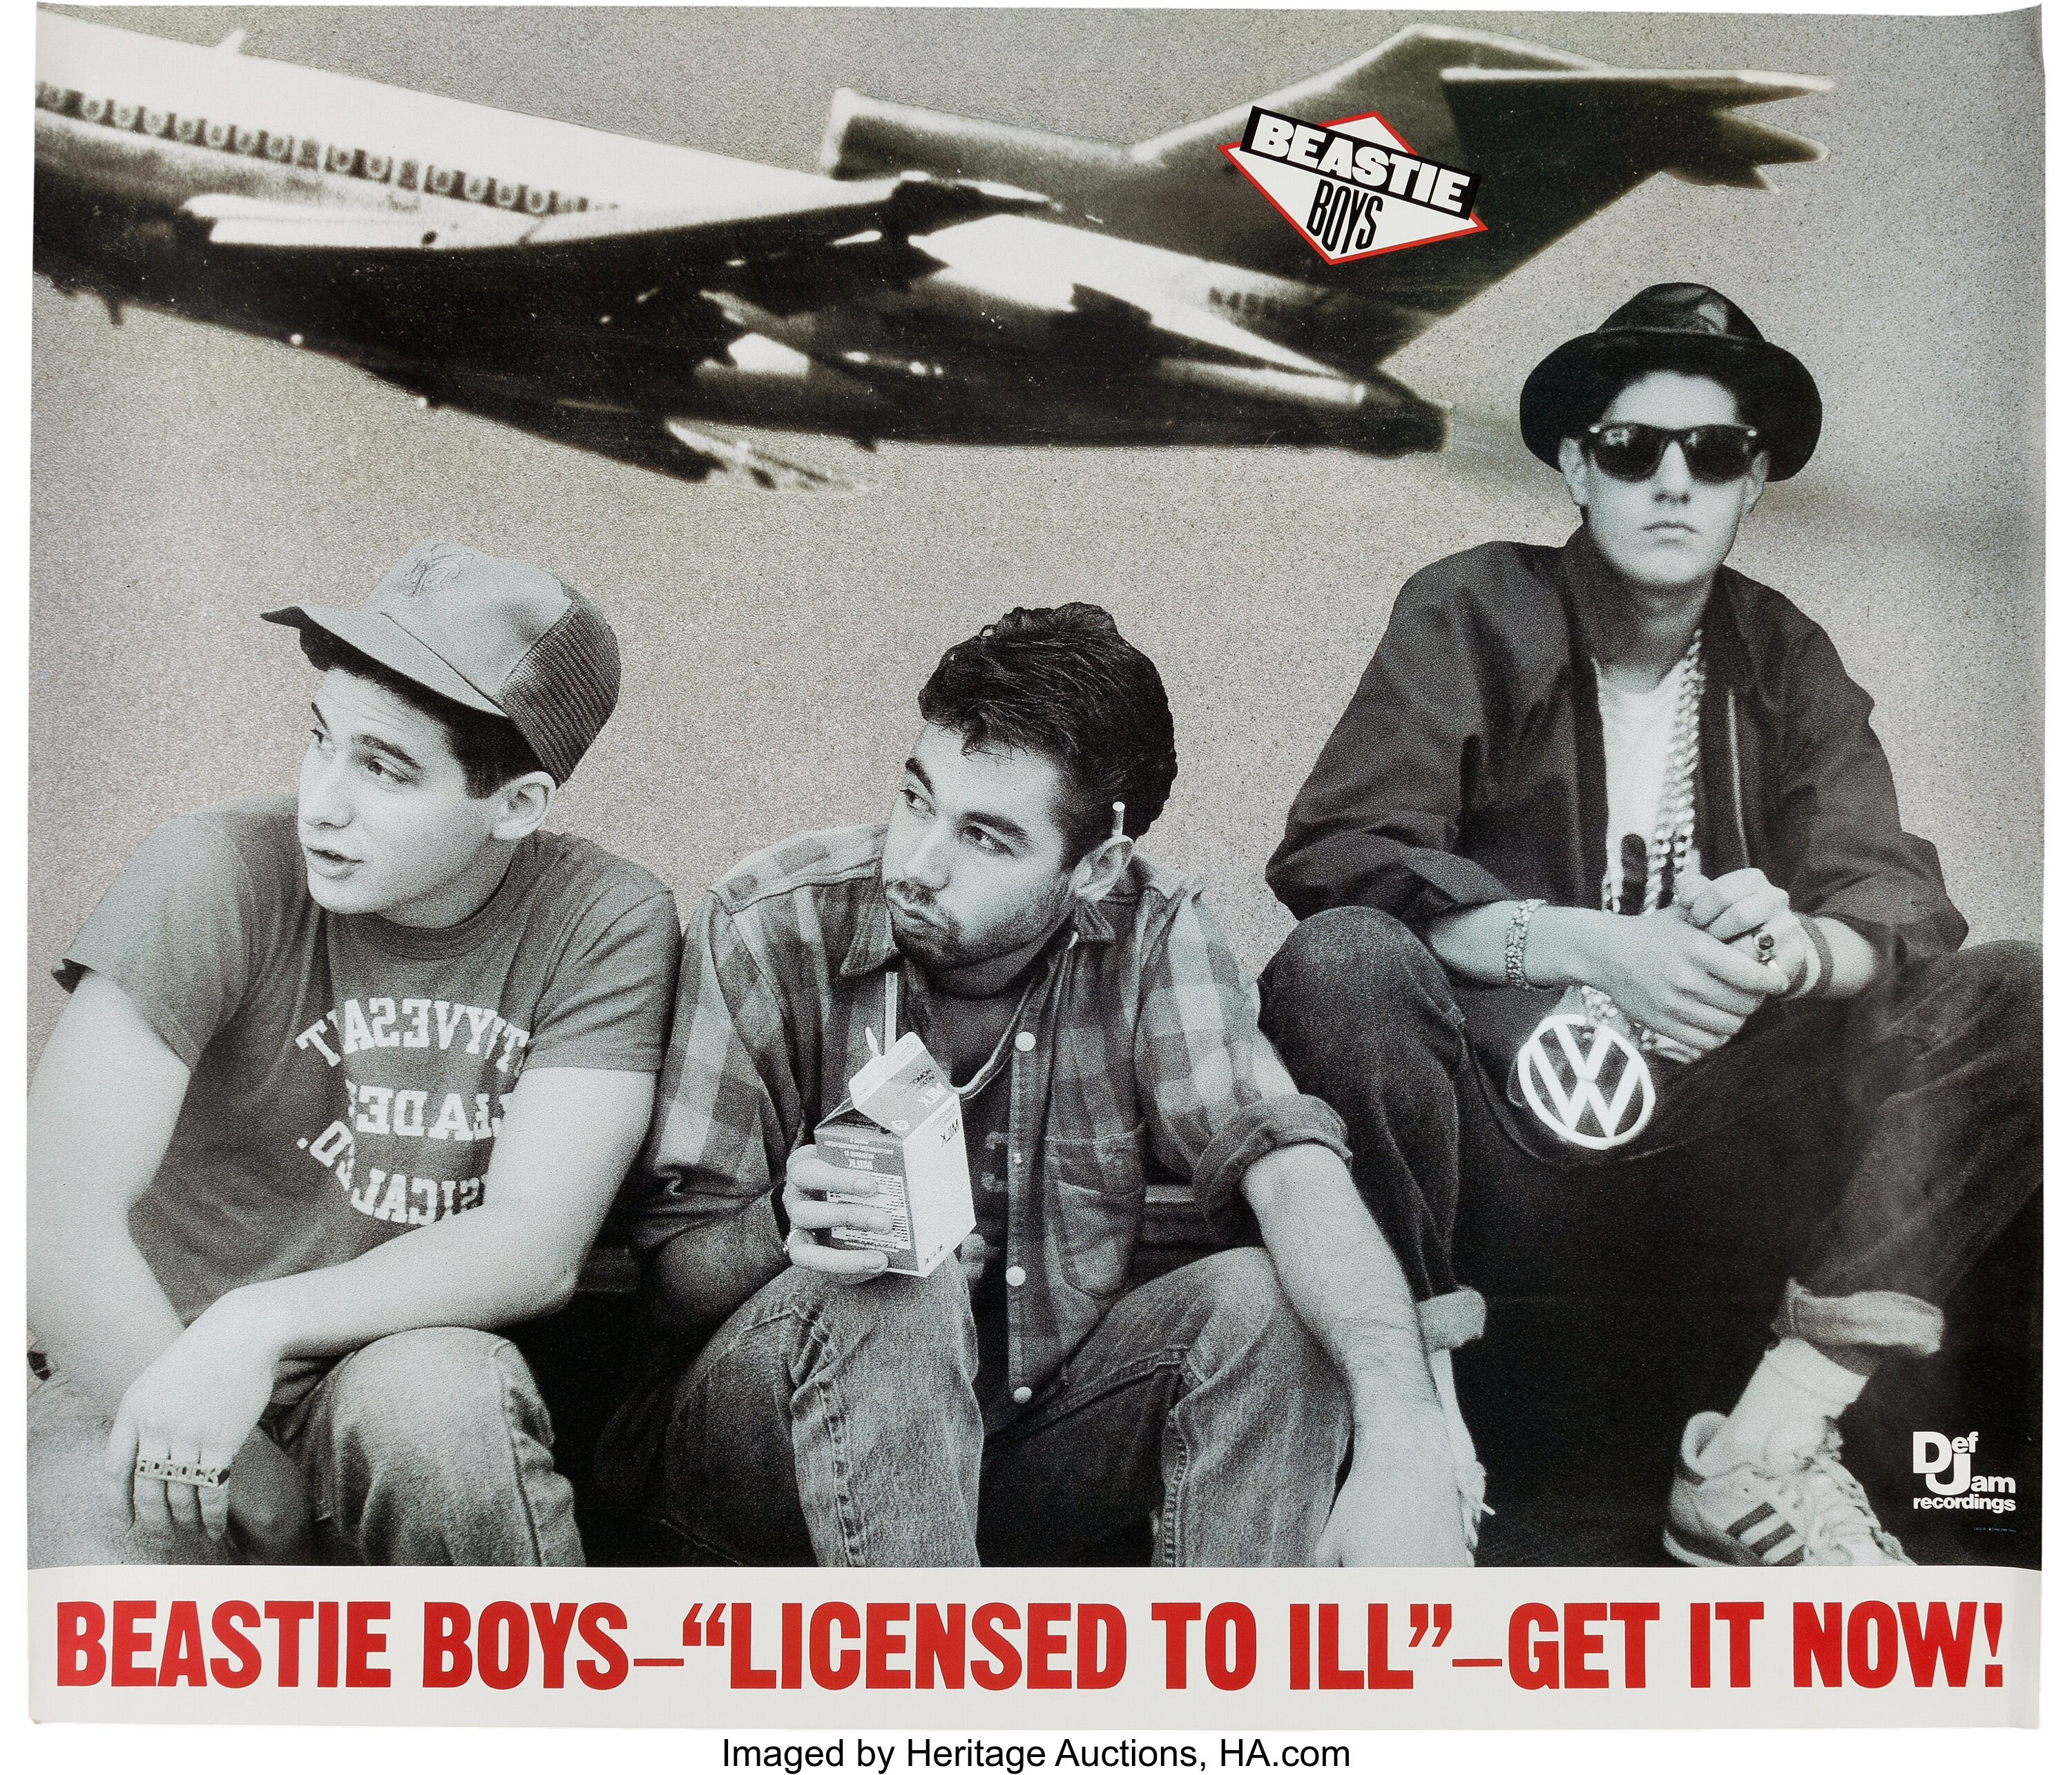 Beastie Boys Licensed to Ill Promotional Poster (Def Jam | Lot #89293 |  Heritage Auctions